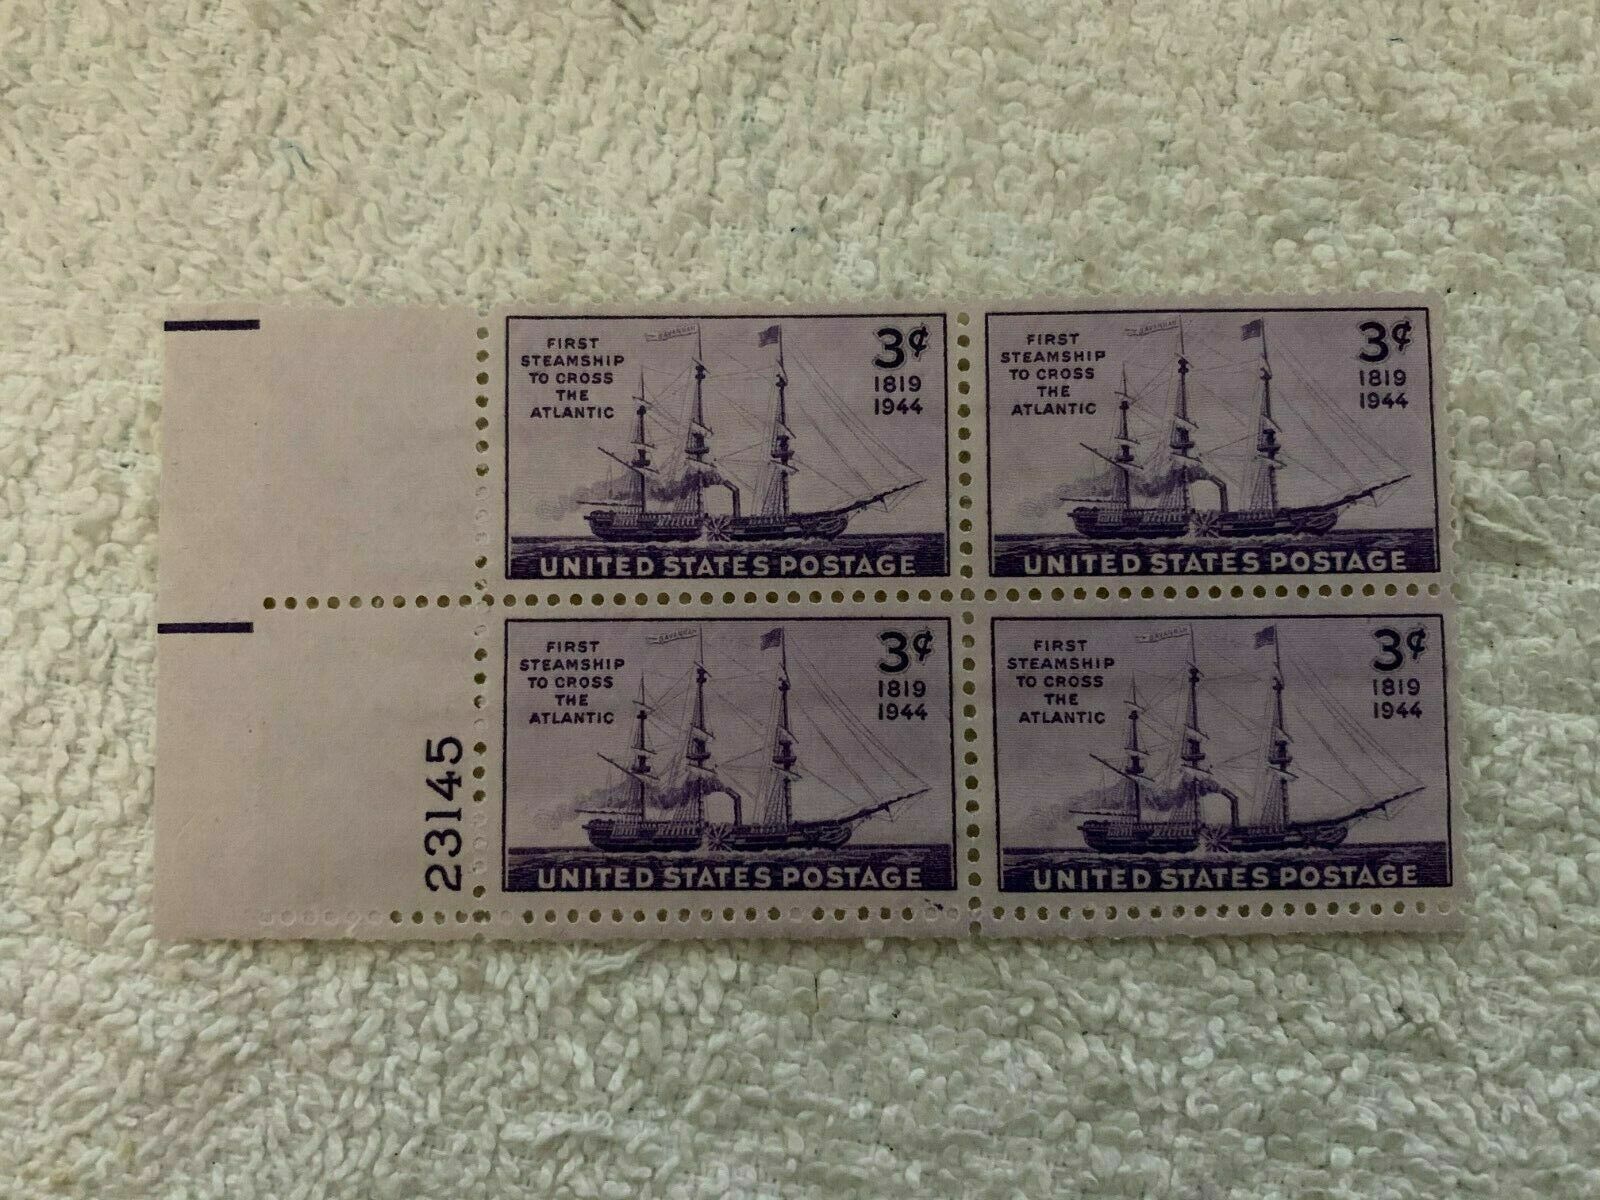 SCOTT 923 MNH Year-end gift 3 CENT PLATE BLOCK Bargain 1944 OF - SHIP 4 STEAM